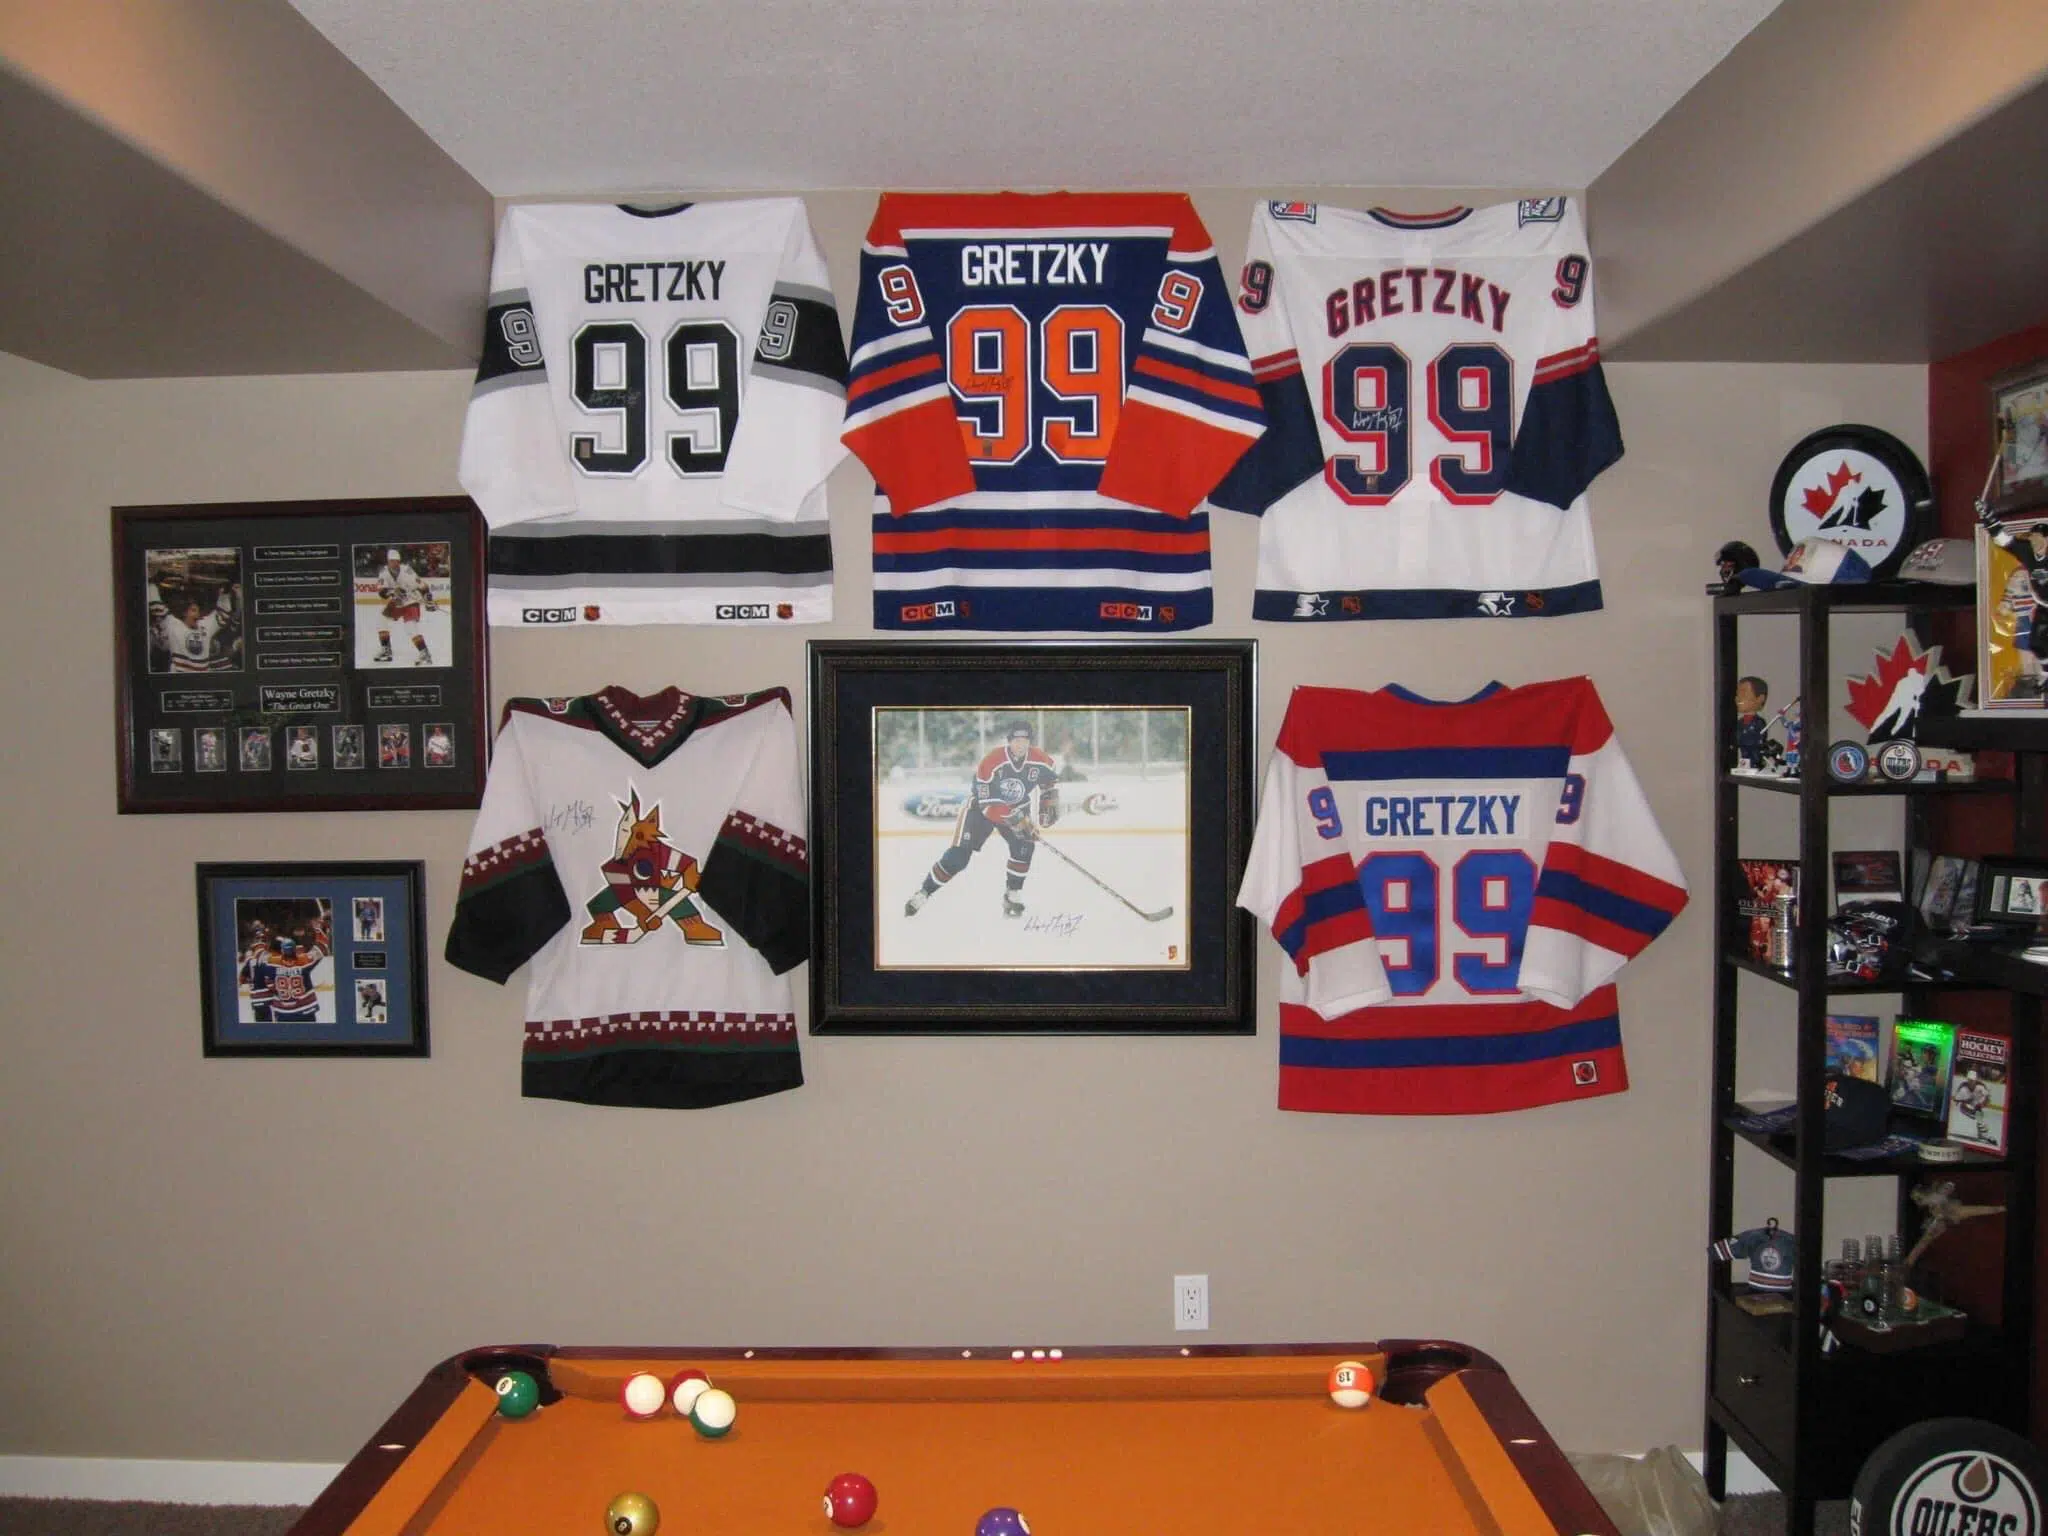 PHOTOS: Greatest collection of Gretzky memorabilia up for auction